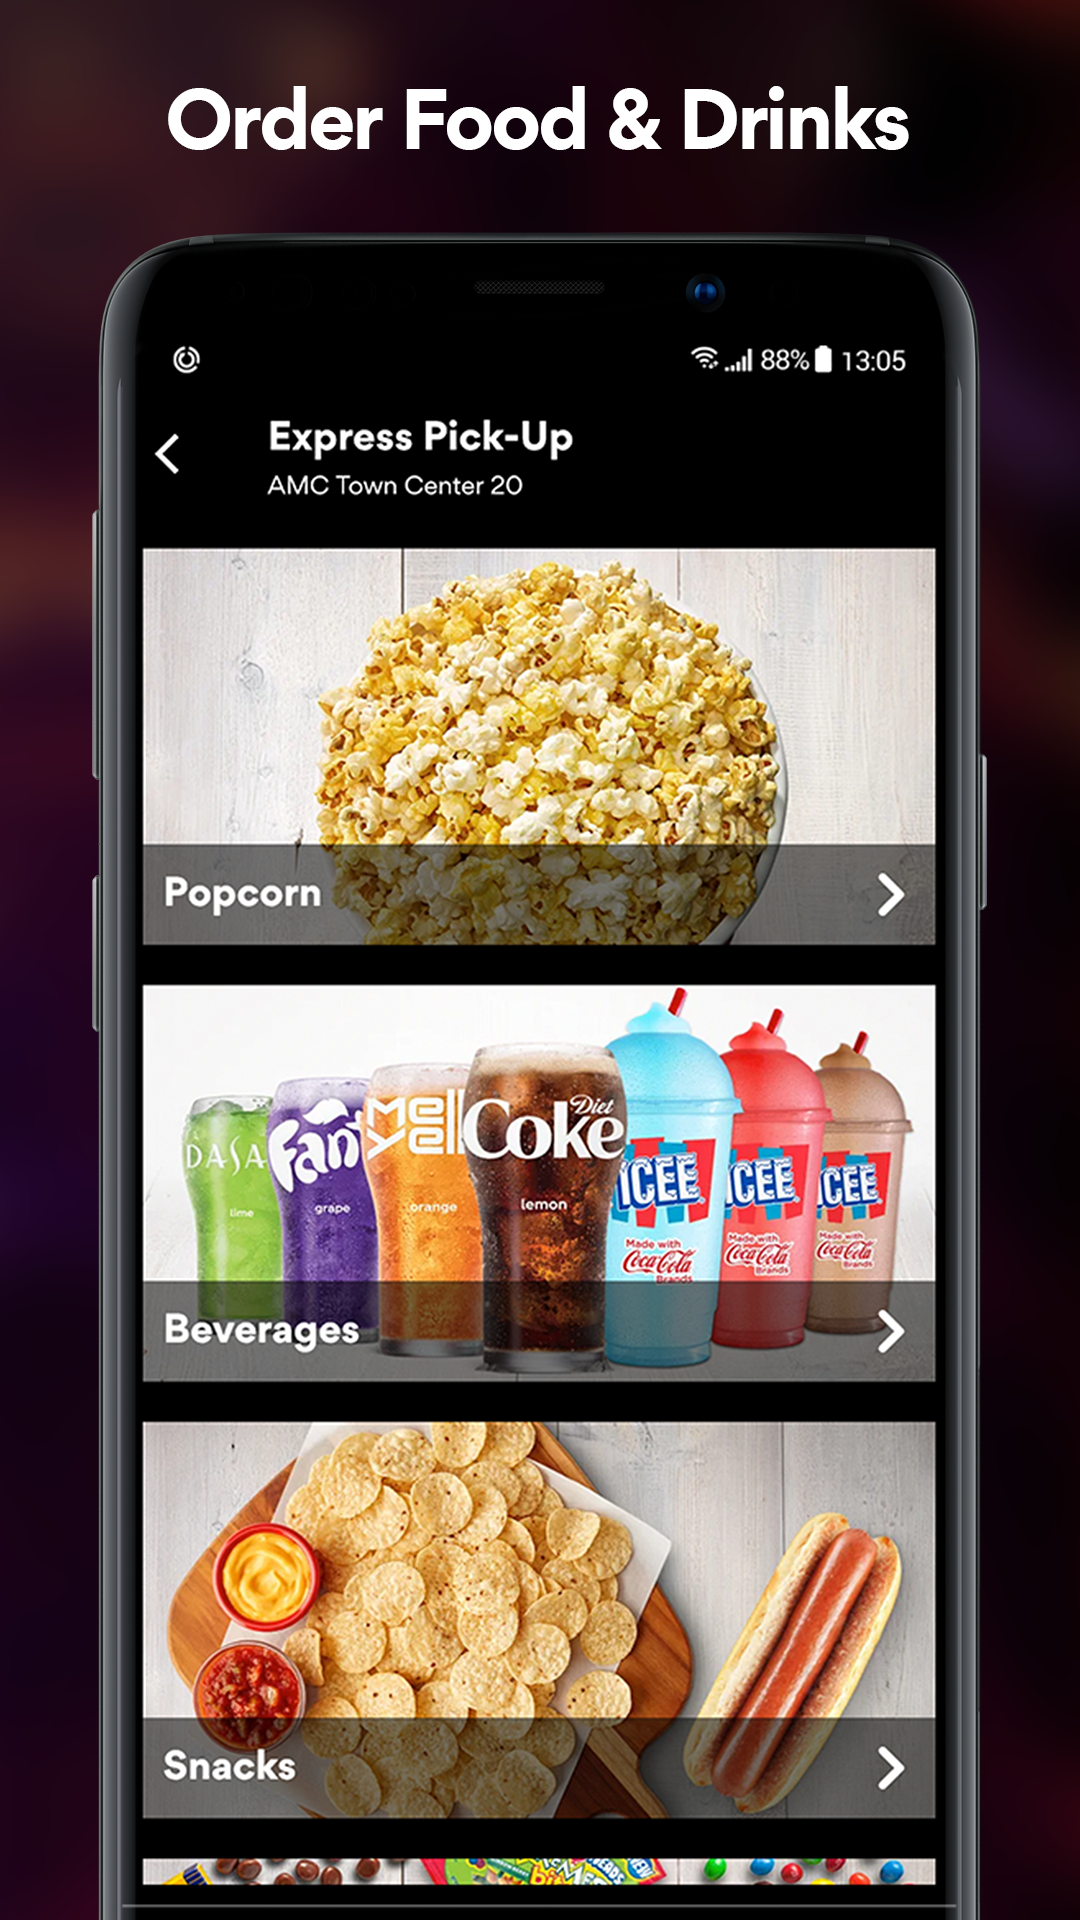 Android application AMC Theatres: Movies & More screenshort